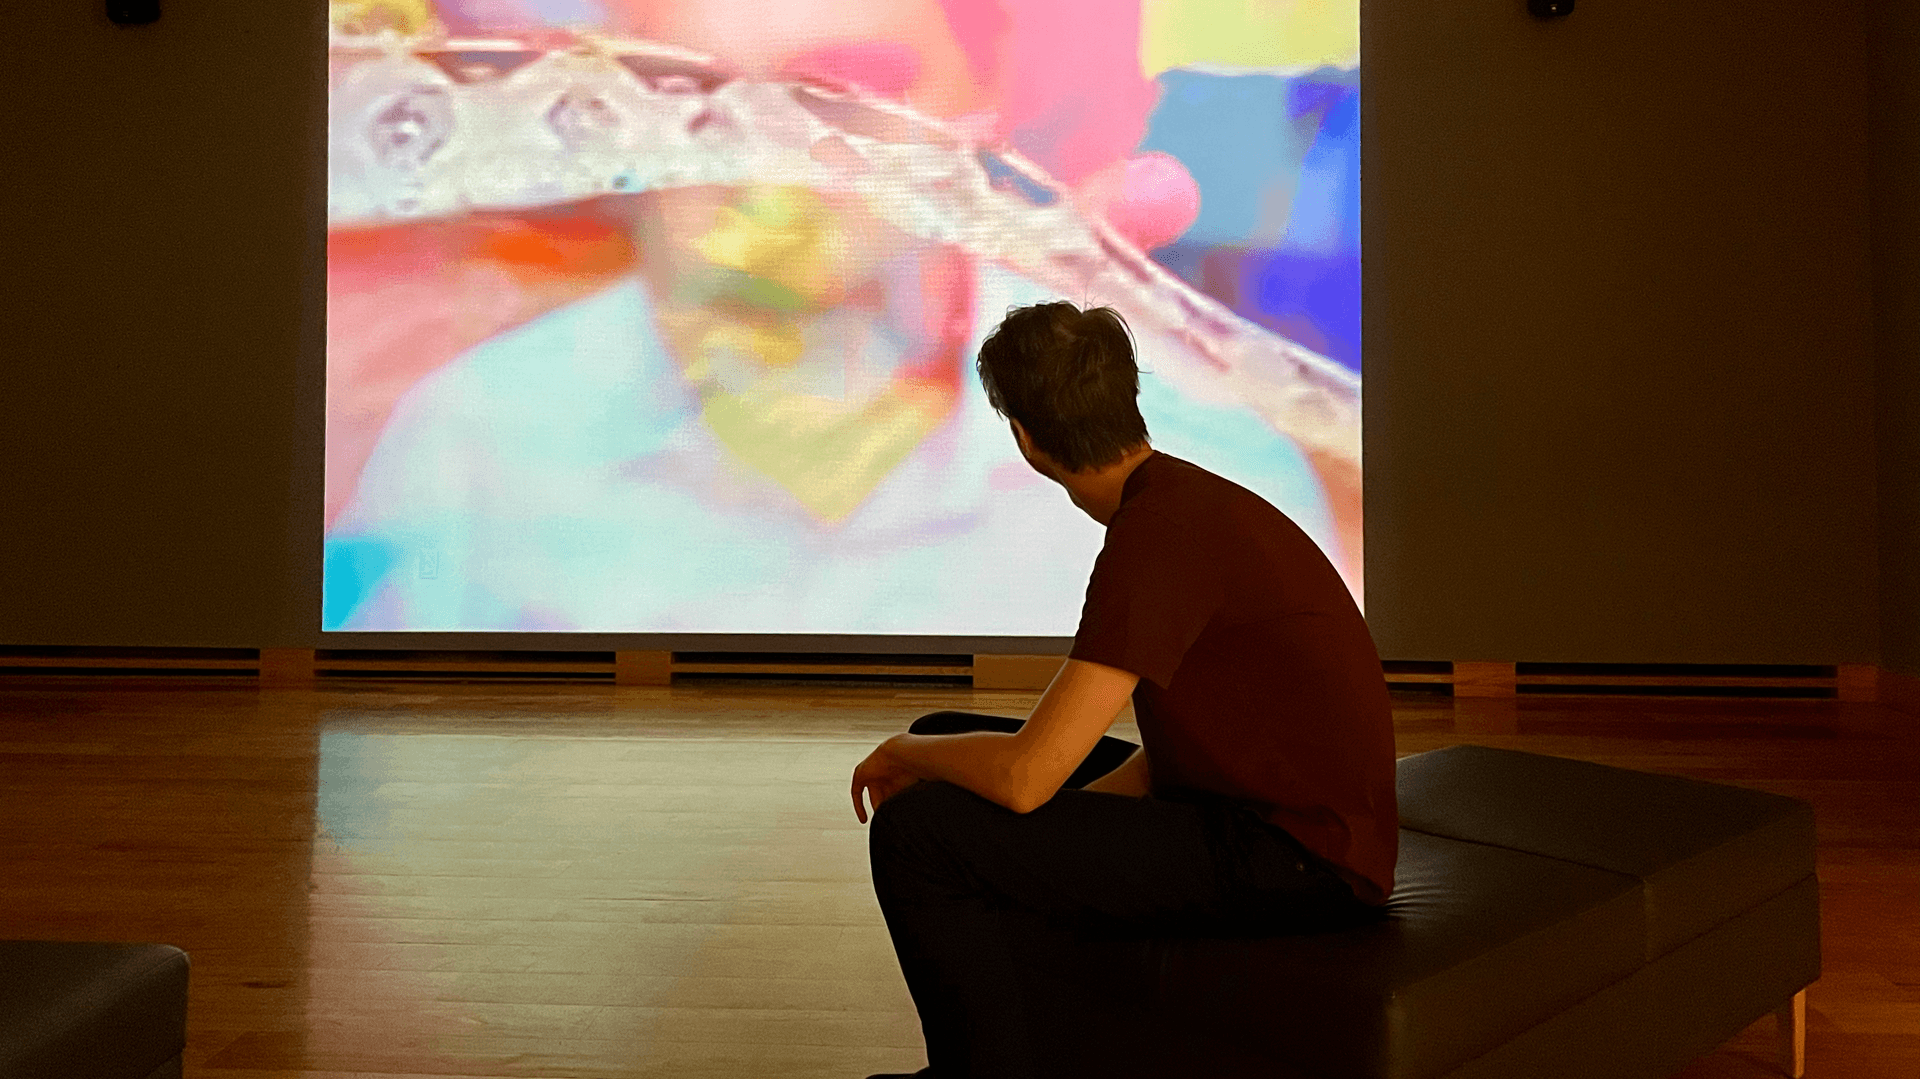 A visitor watching the main projection